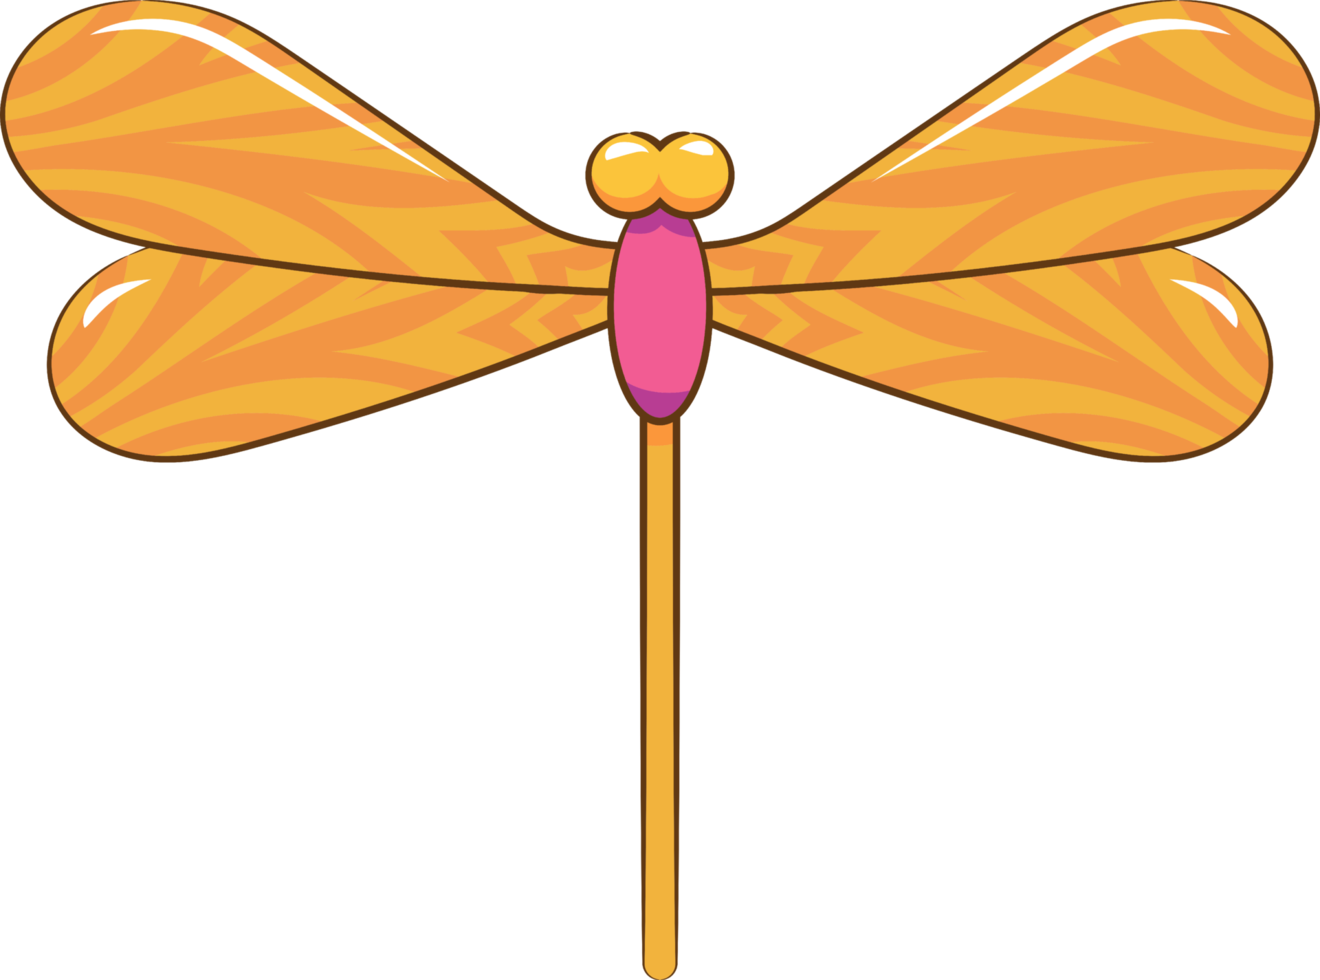 Dragonfly png graphic clipart design